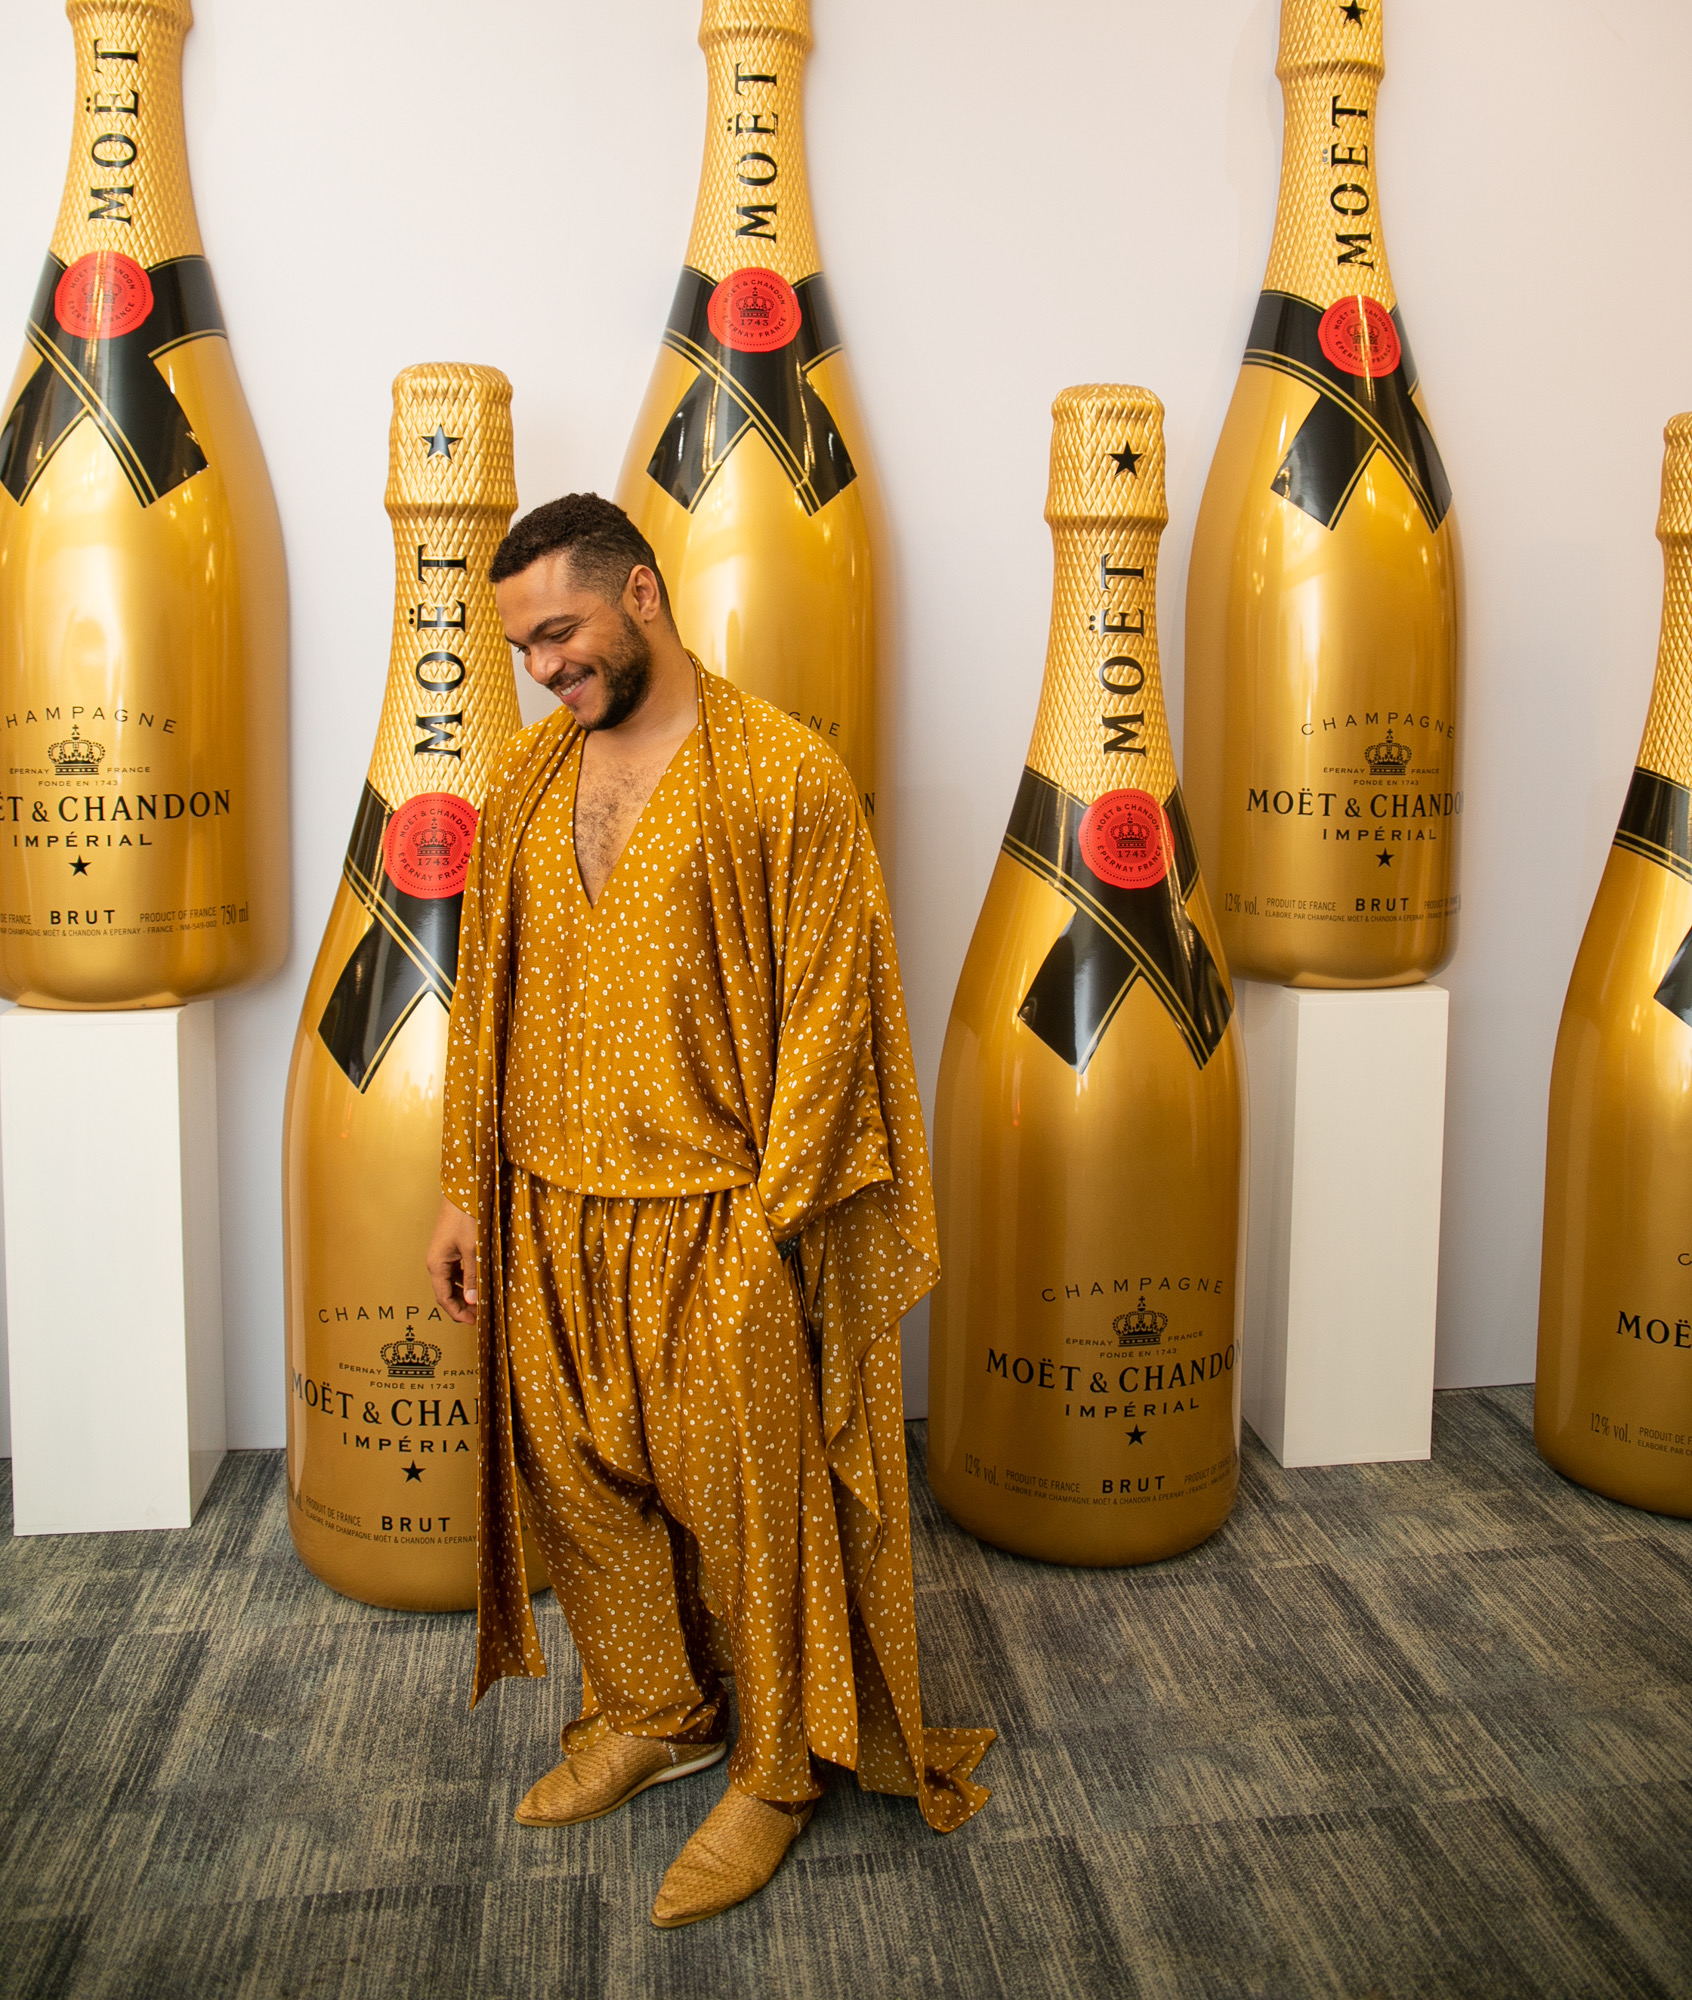 Nigeria's thirst for Champagne explodes - The Drinks Business